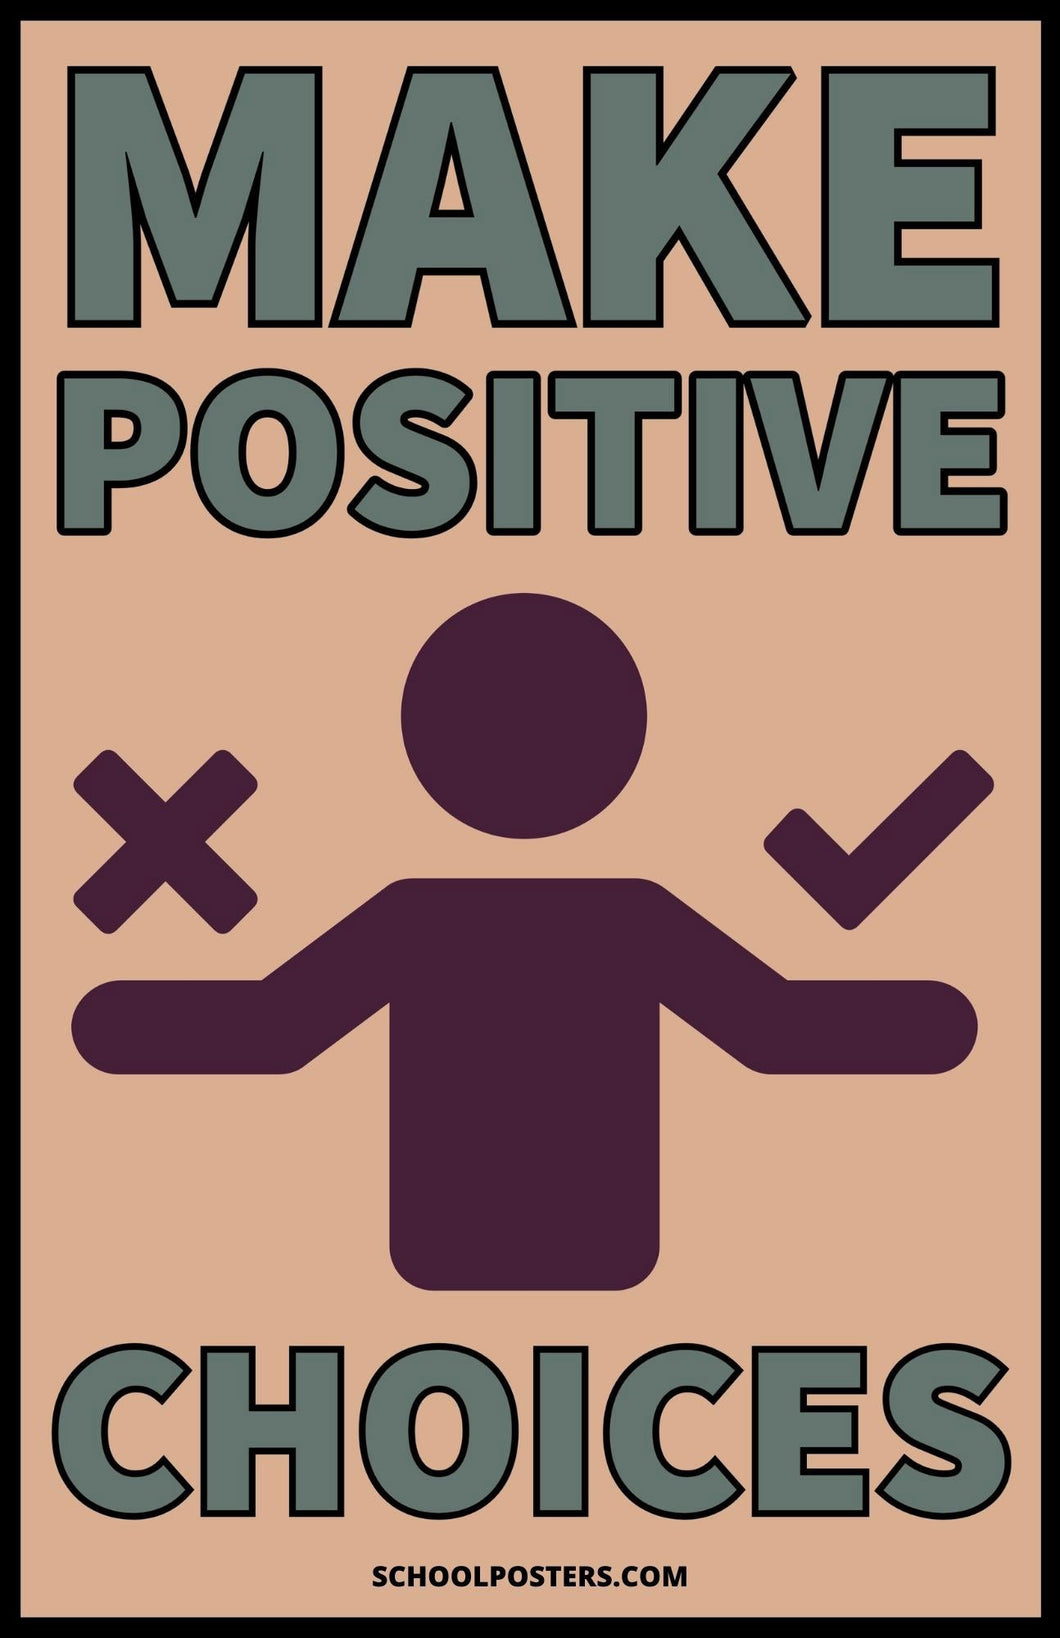 Make Positive Choices Poster